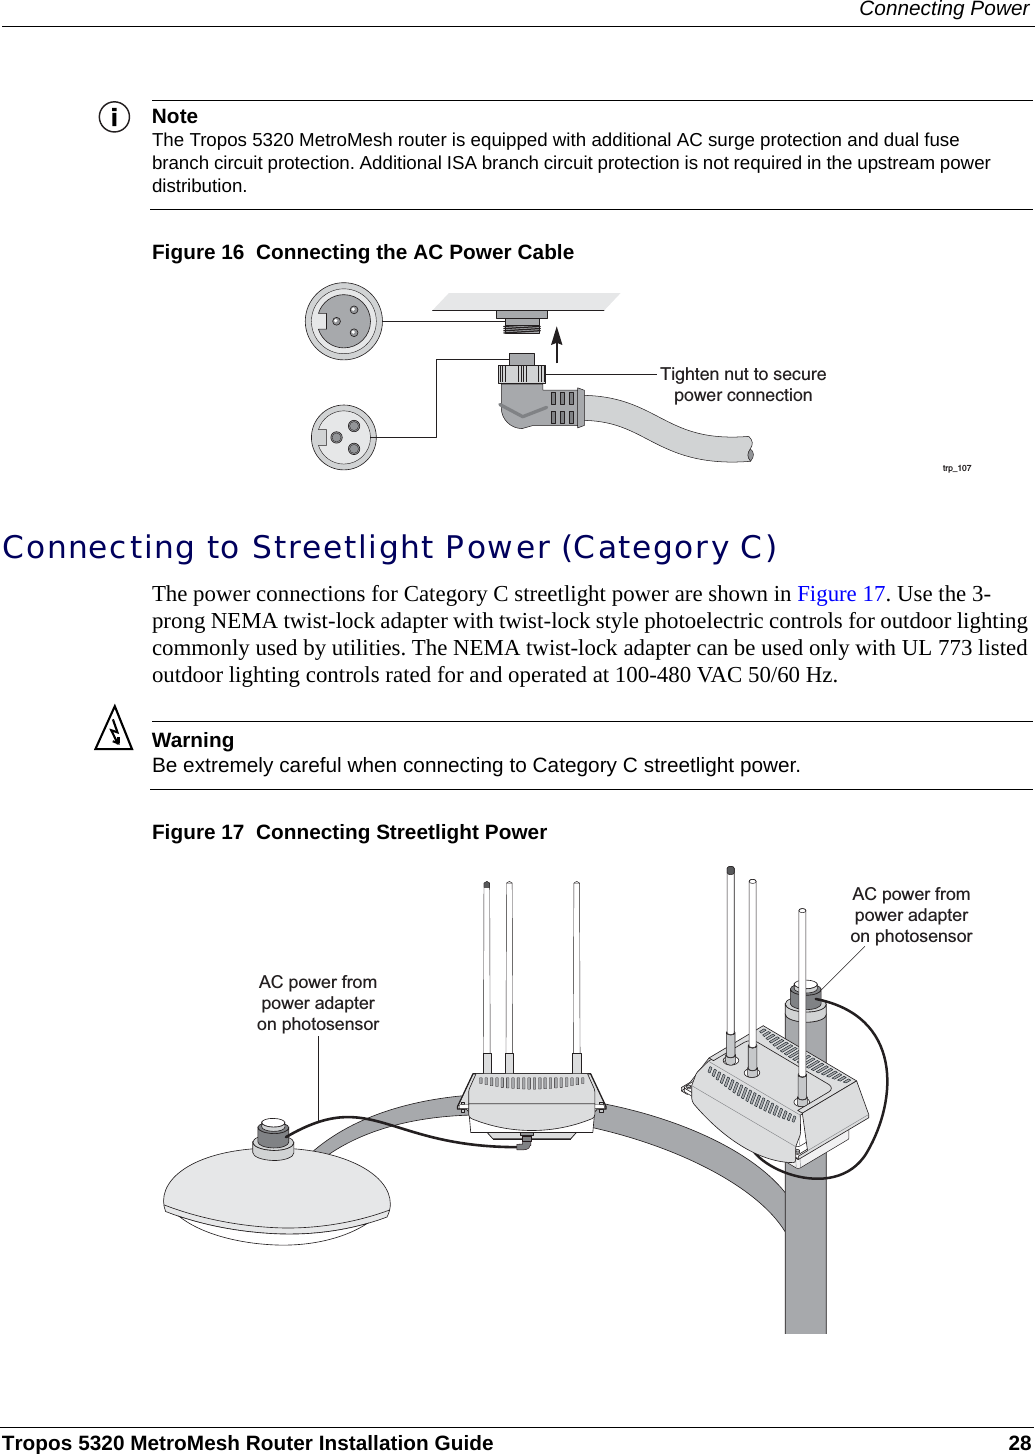 Connecting PowerTropos 5320 MetroMesh Router Installation Guide 28NoteThe Tropos 5320 MetroMesh router is equipped with additional AC surge protection and dual fuse branch circuit protection. Additional ISA branch circuit protection is not required in the upstream power distribution.Figure 16  Connecting the AC Power CableConnecting to Streetlight Power (Category C)The power connections for Category C streetlight power are shown in Figure 17. Use the 3-prong NEMA twist-lock adapter with twist-lock style photoelectric controls for outdoor lighting commonly used by utilities. The NEMA twist-lock adapter can be used only with UL 773 listed outdoor lighting controls rated for and operated at 100-480 VAC 50/60 Hz.WarningBe extremely careful when connecting to Category C streetlight power. Figure 17  Connecting Streetlight Powertrp_107Tighten nut to securepower connectionAC power frompower adapteron photosensorAC power frompower adapteron photosensor